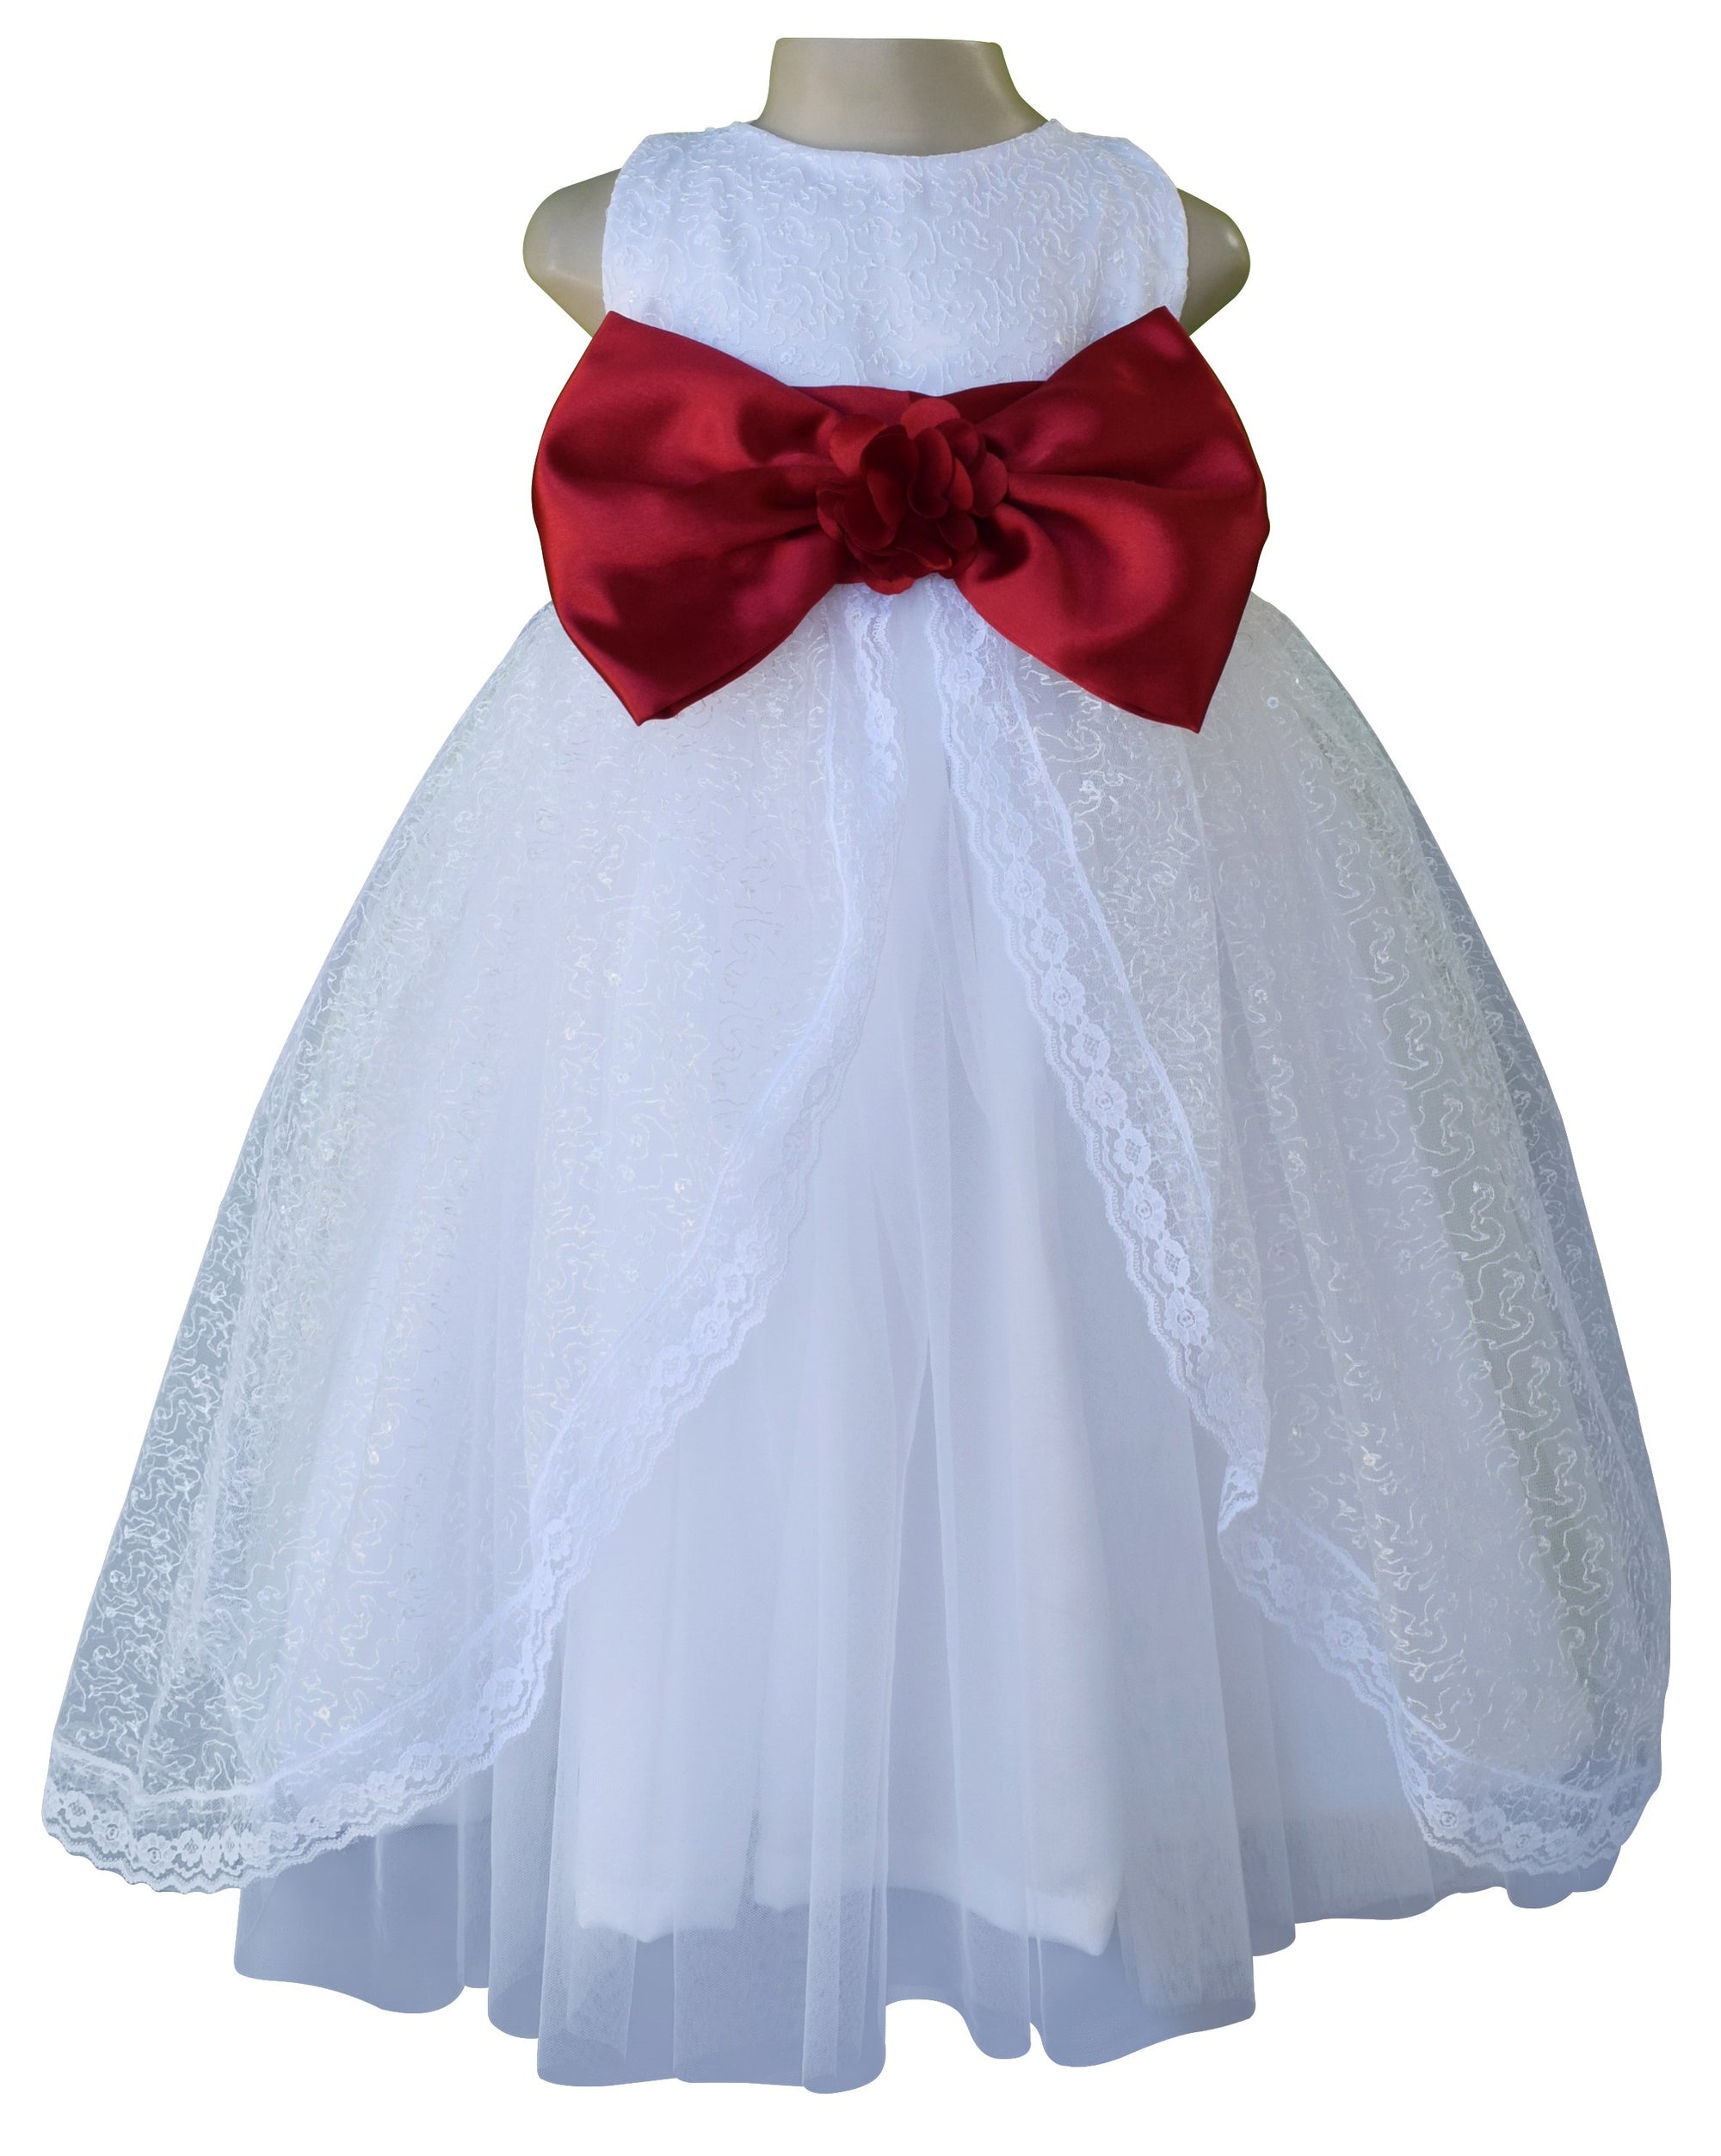 Faye White Embroidered Gown with Maroon Bow & Sash